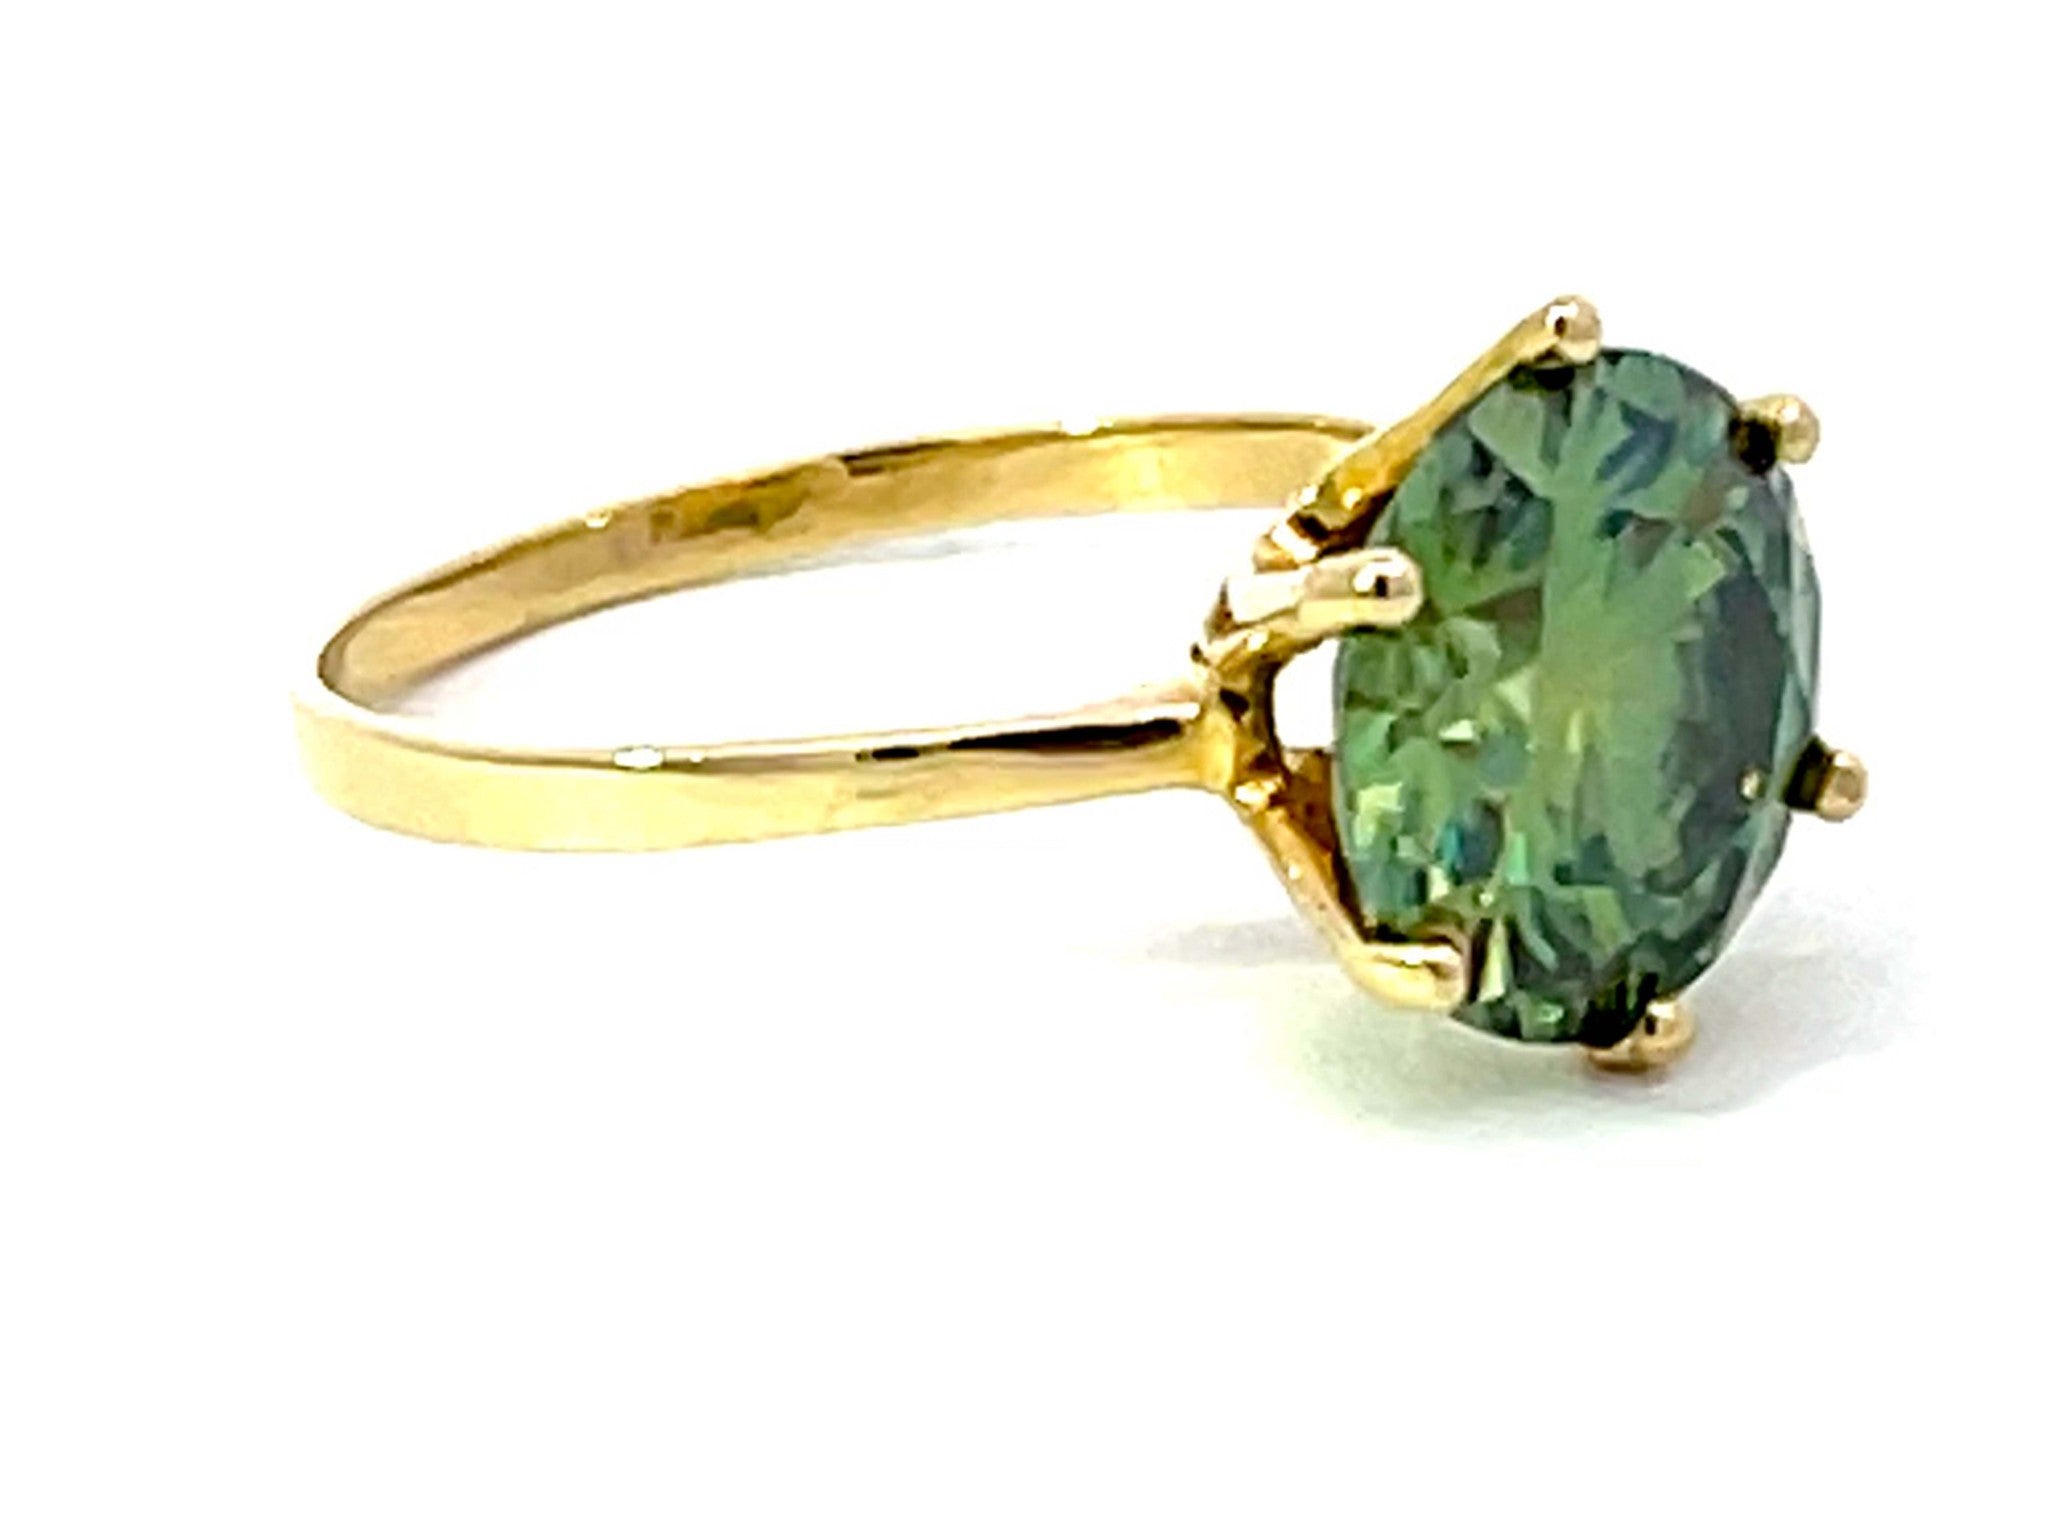 4 Carat Fancy Intense Green Moissanite Solitaire Ring in 14K Yellow Gold